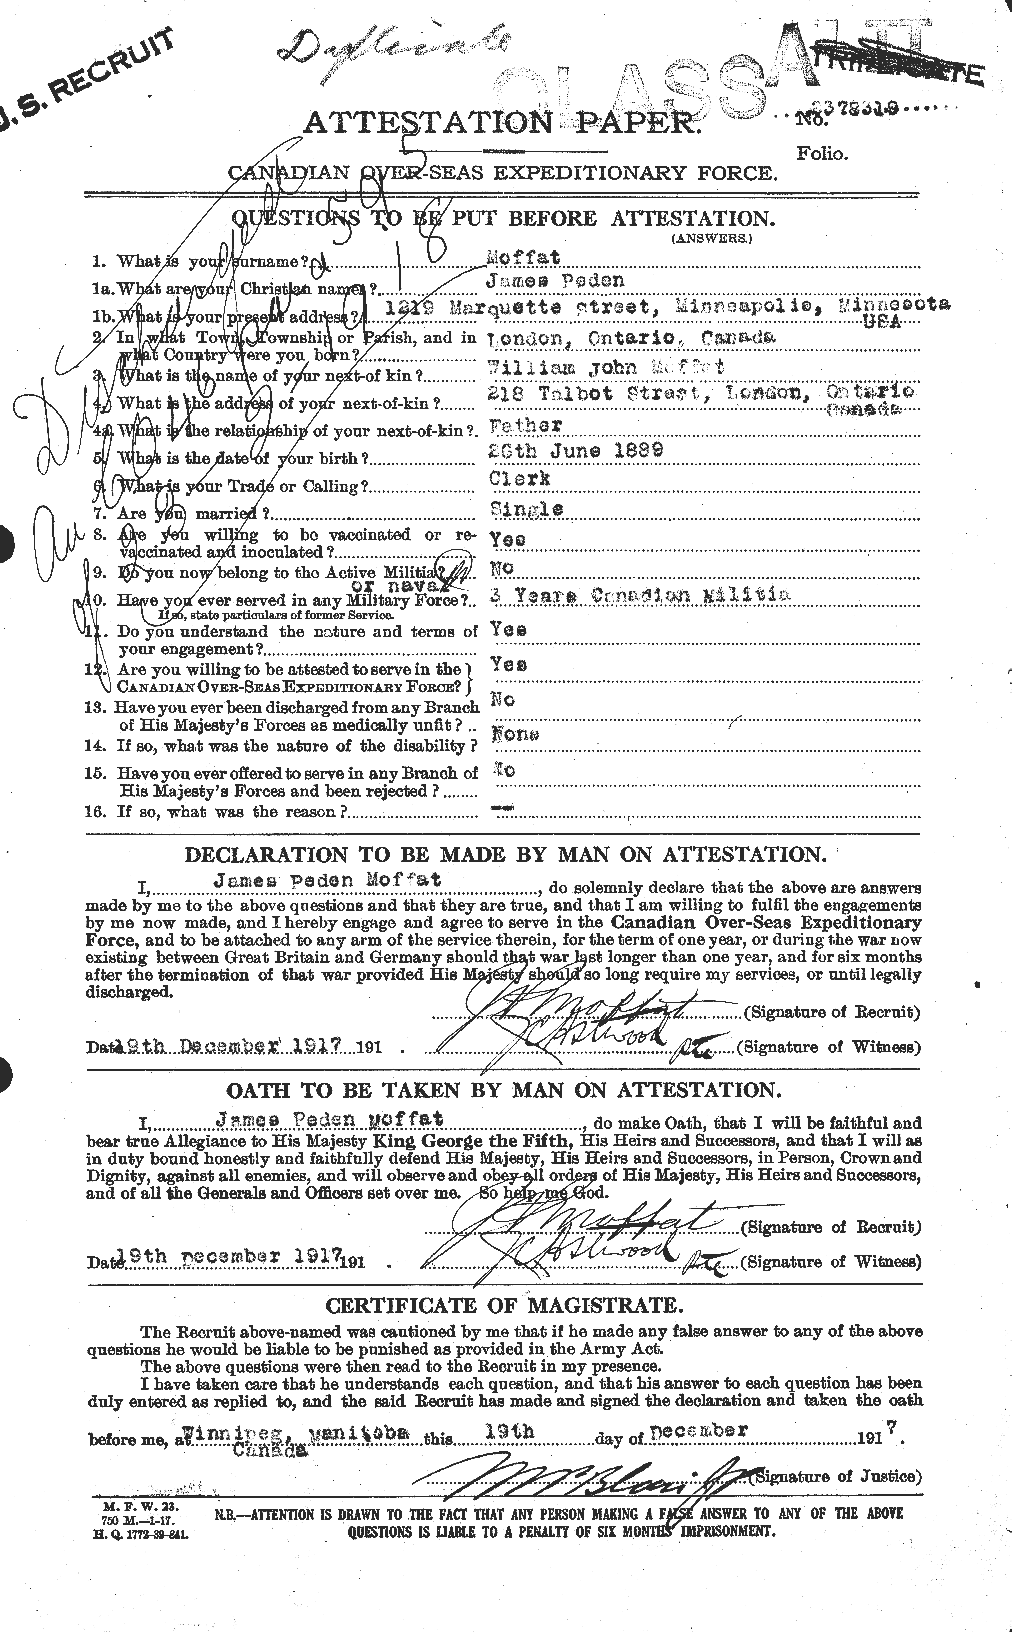 Personnel Records of the First World War - CEF 499038a